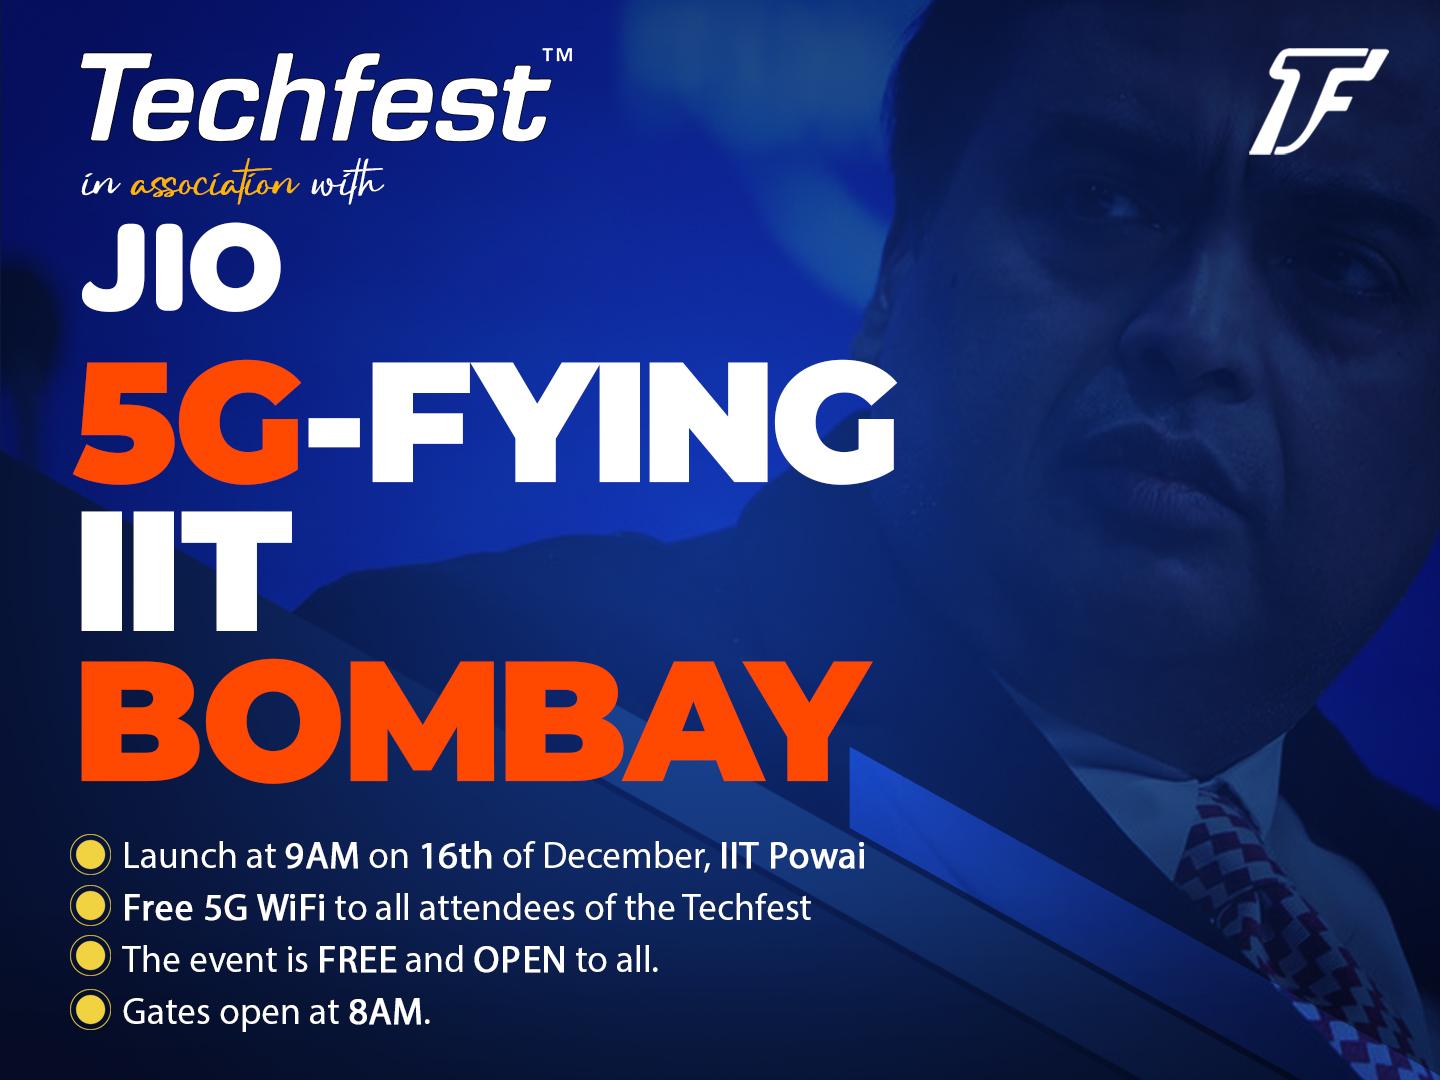 26th edition of IIT Bombay’s Techfest is ready with its Highlights and Show-stoppers to pull the crowd from all over the Nation